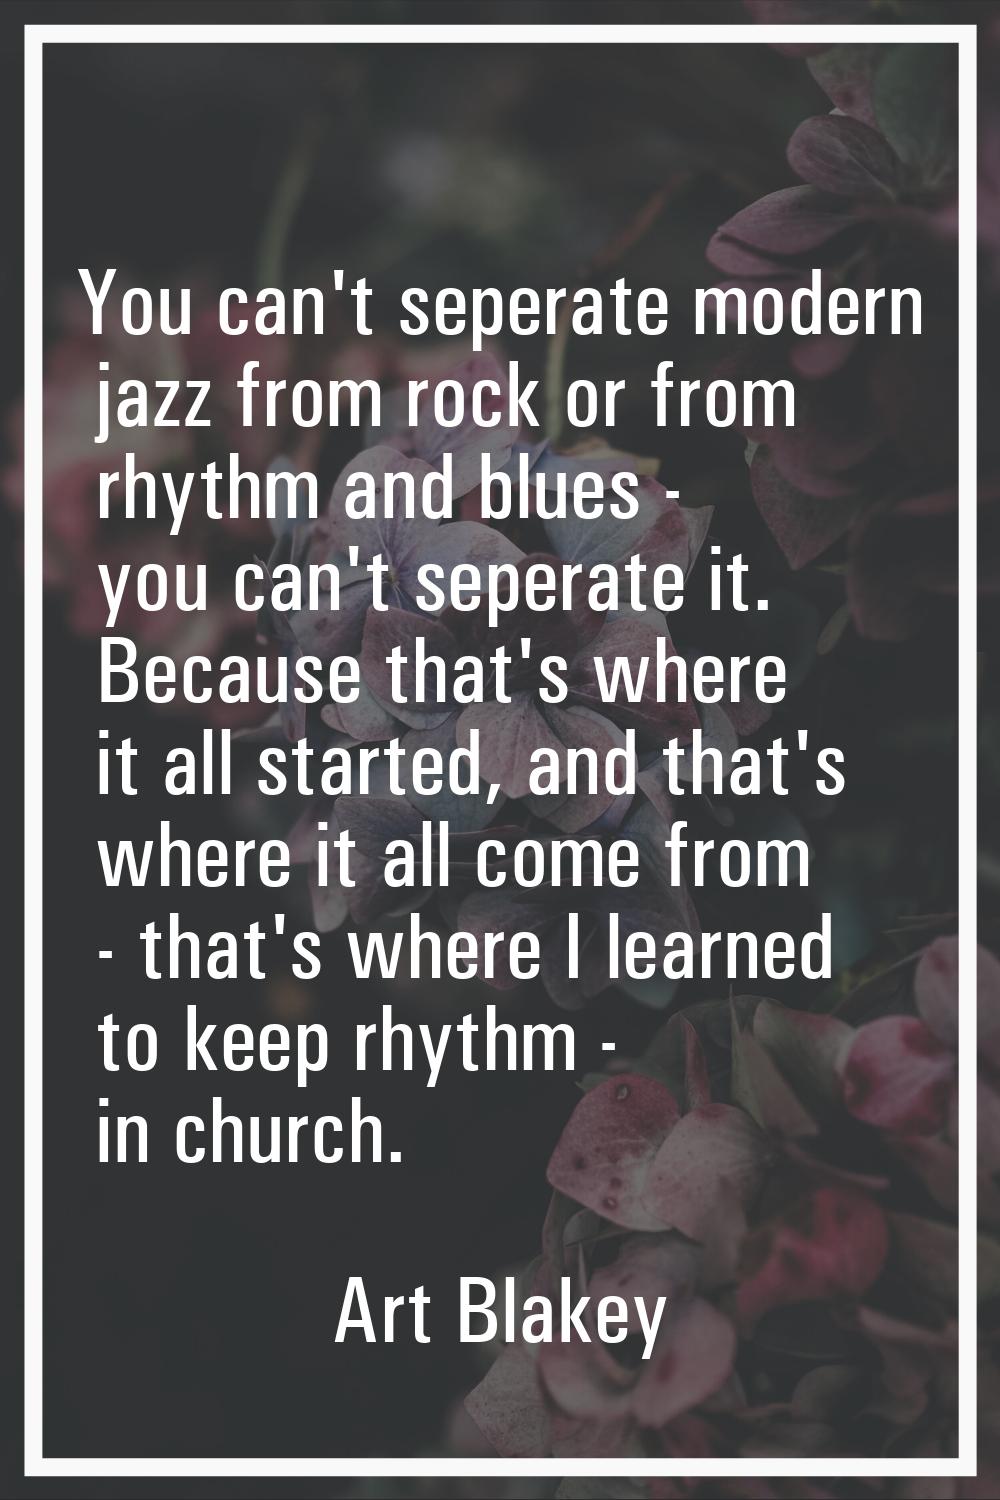 You can't seperate modern jazz from rock or from rhythm and blues - you can't seperate it. Because 